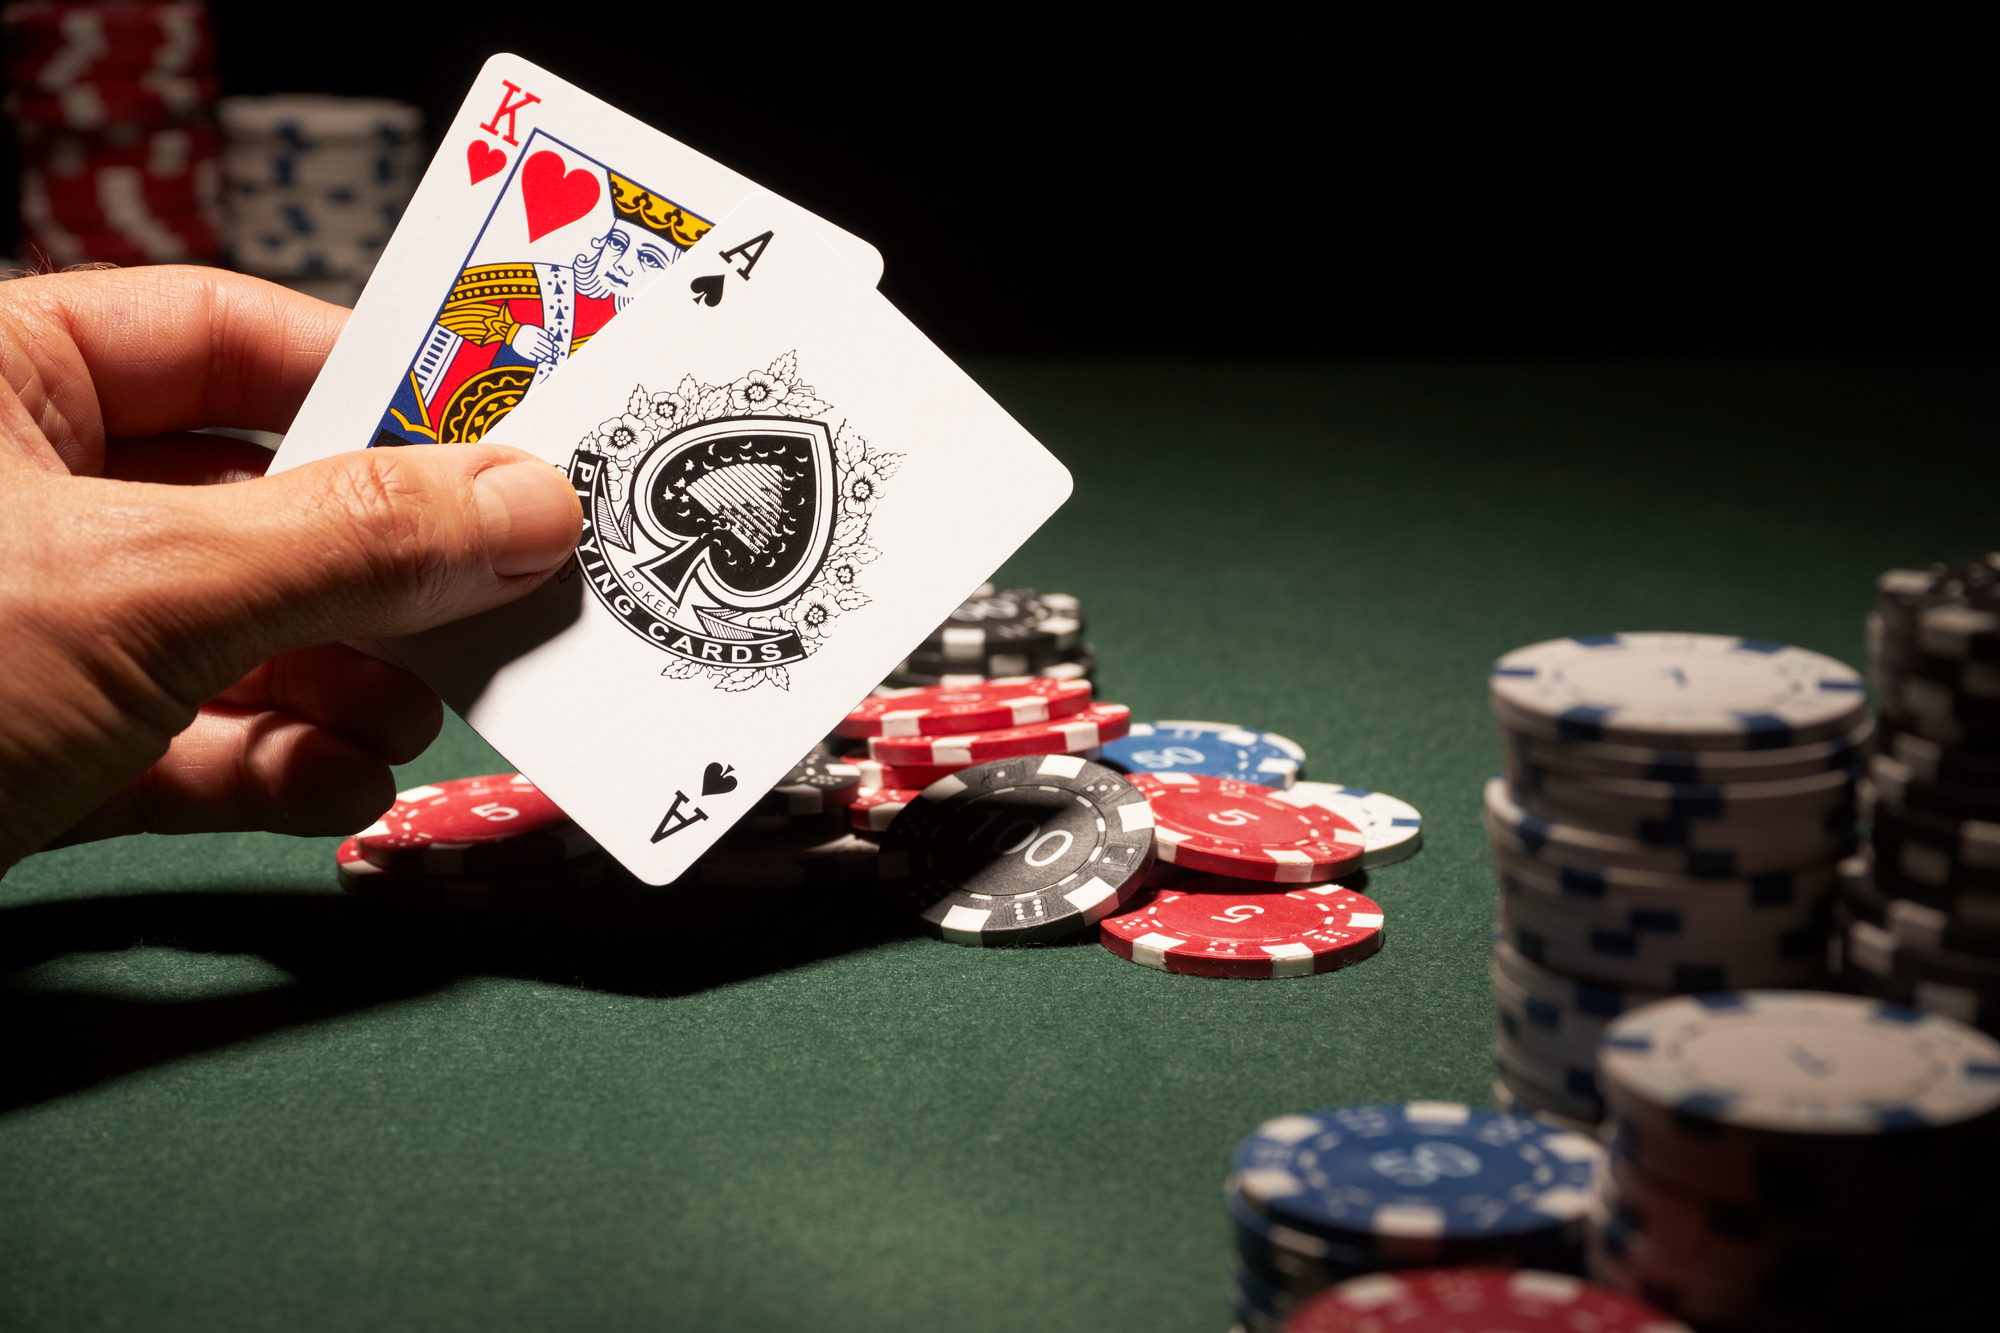 How to play blackjack in a charity event?